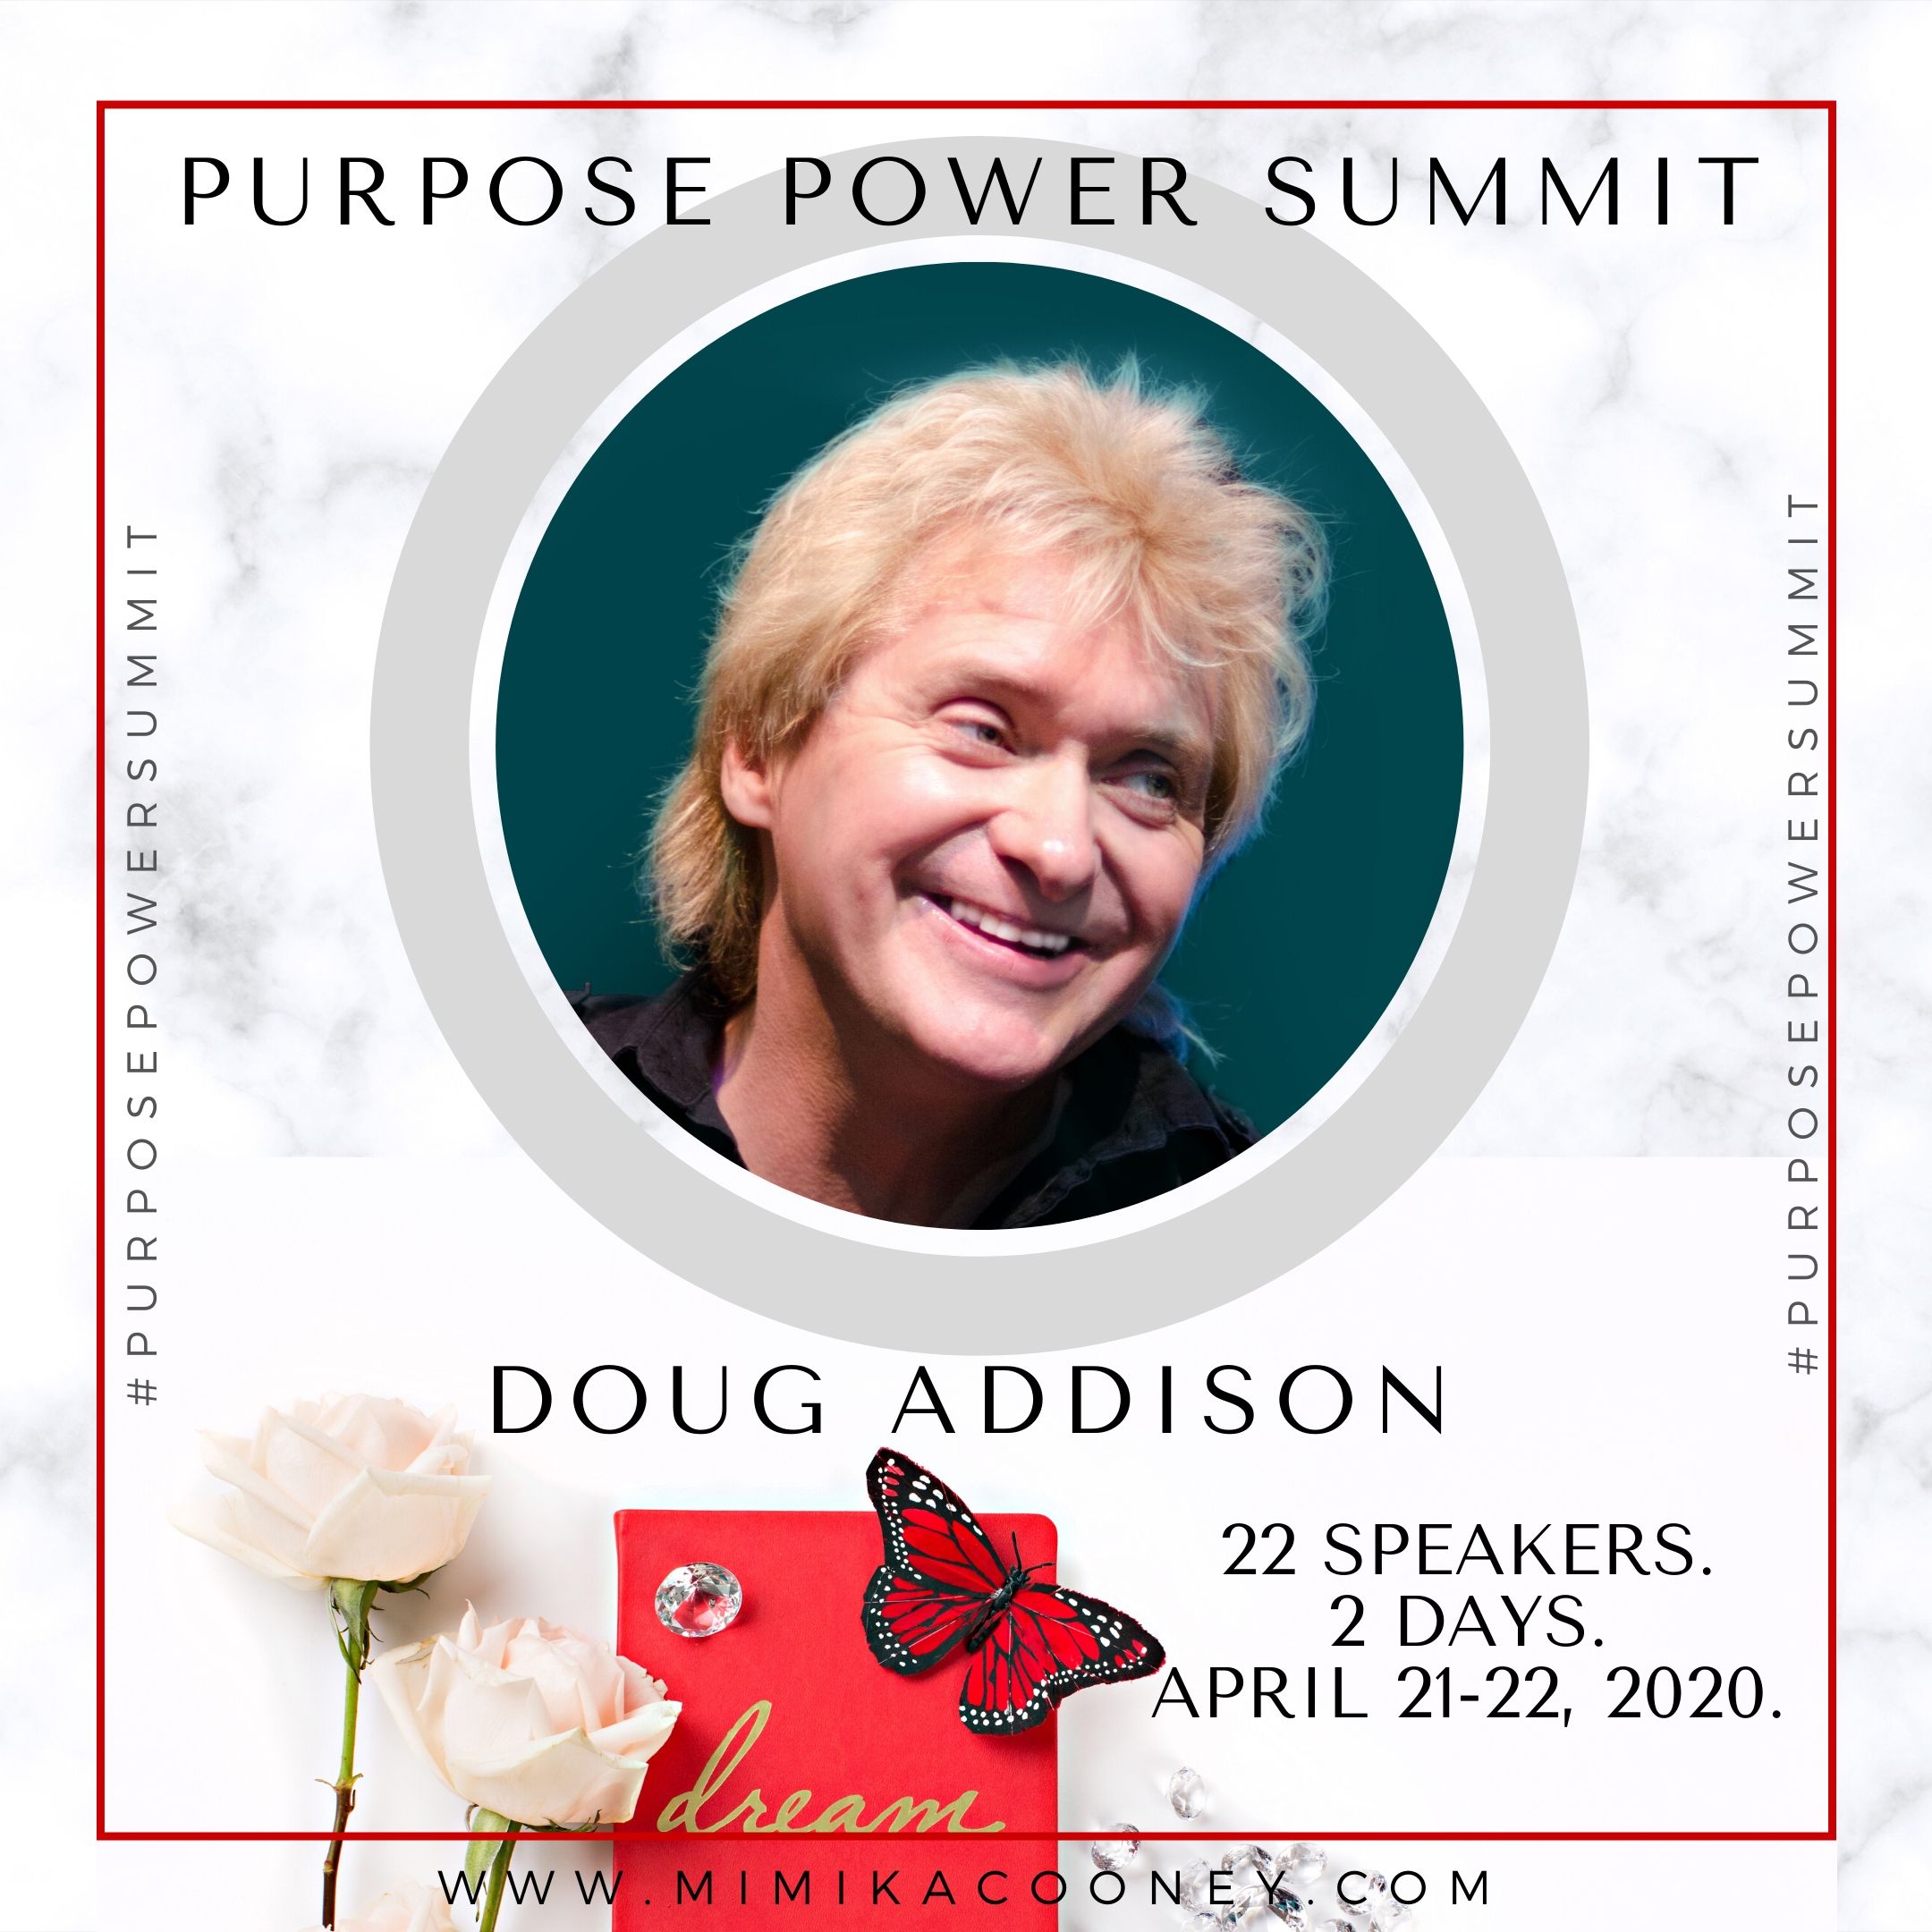 Purpose Power Summit with Doug Addison, Mimika Cooney and others